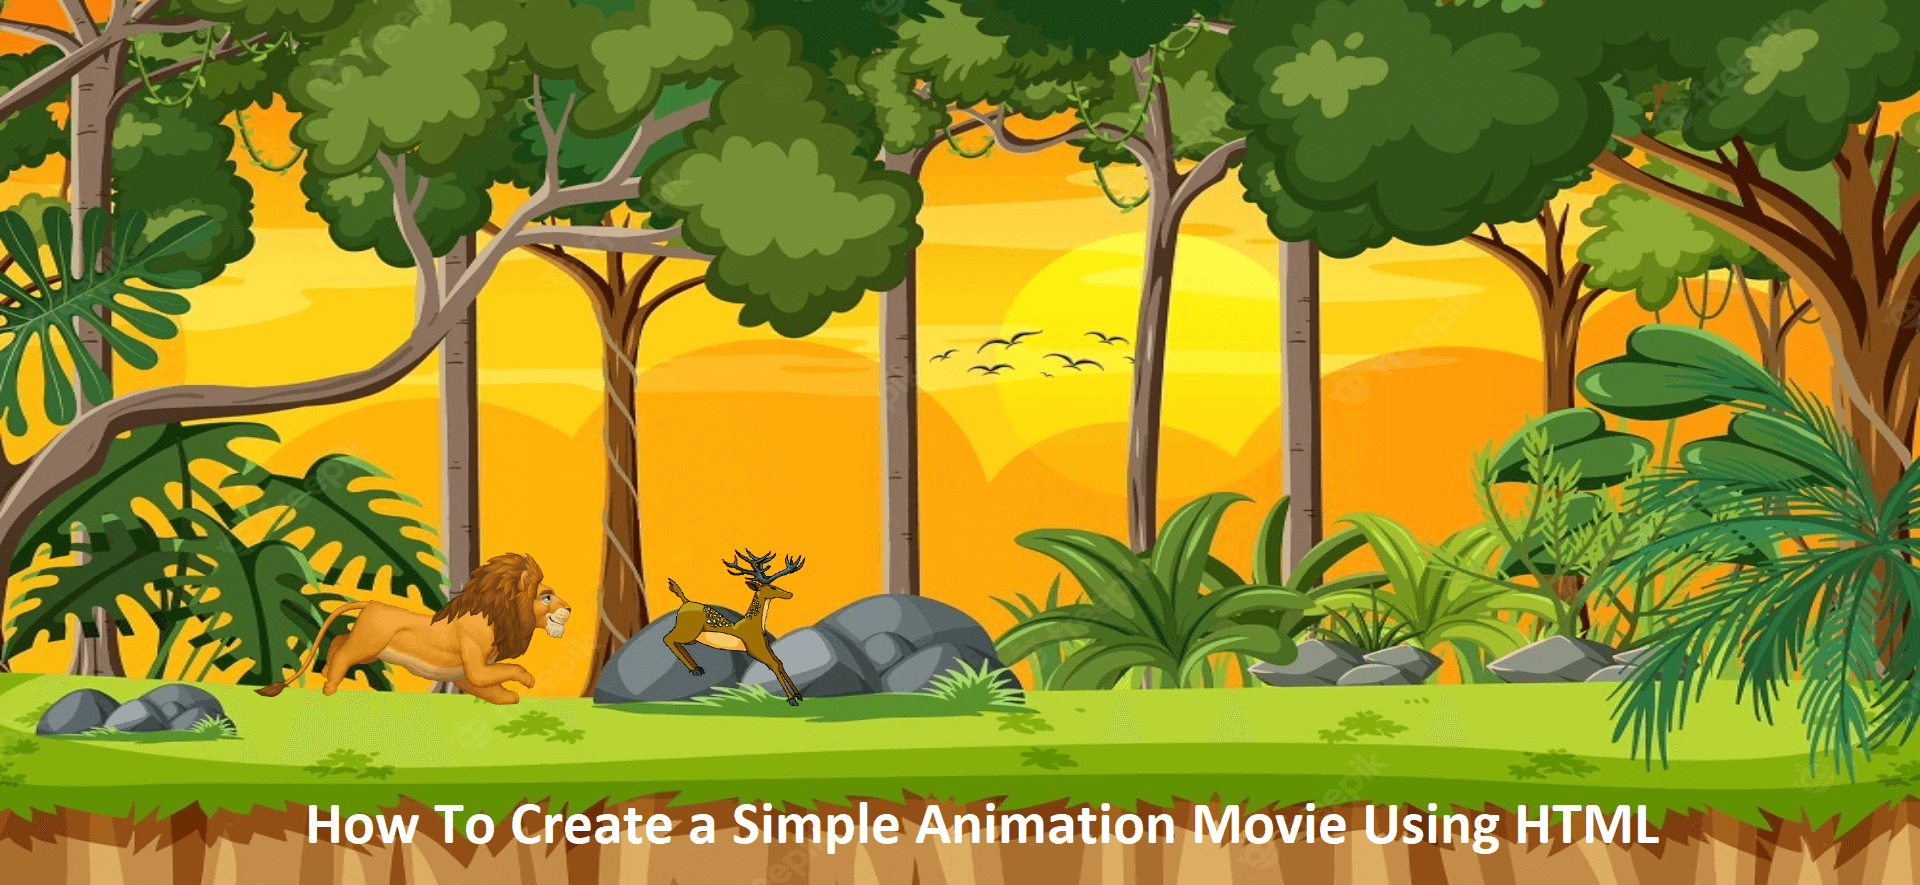 How To Create a Simple Animation Movie Using HTML